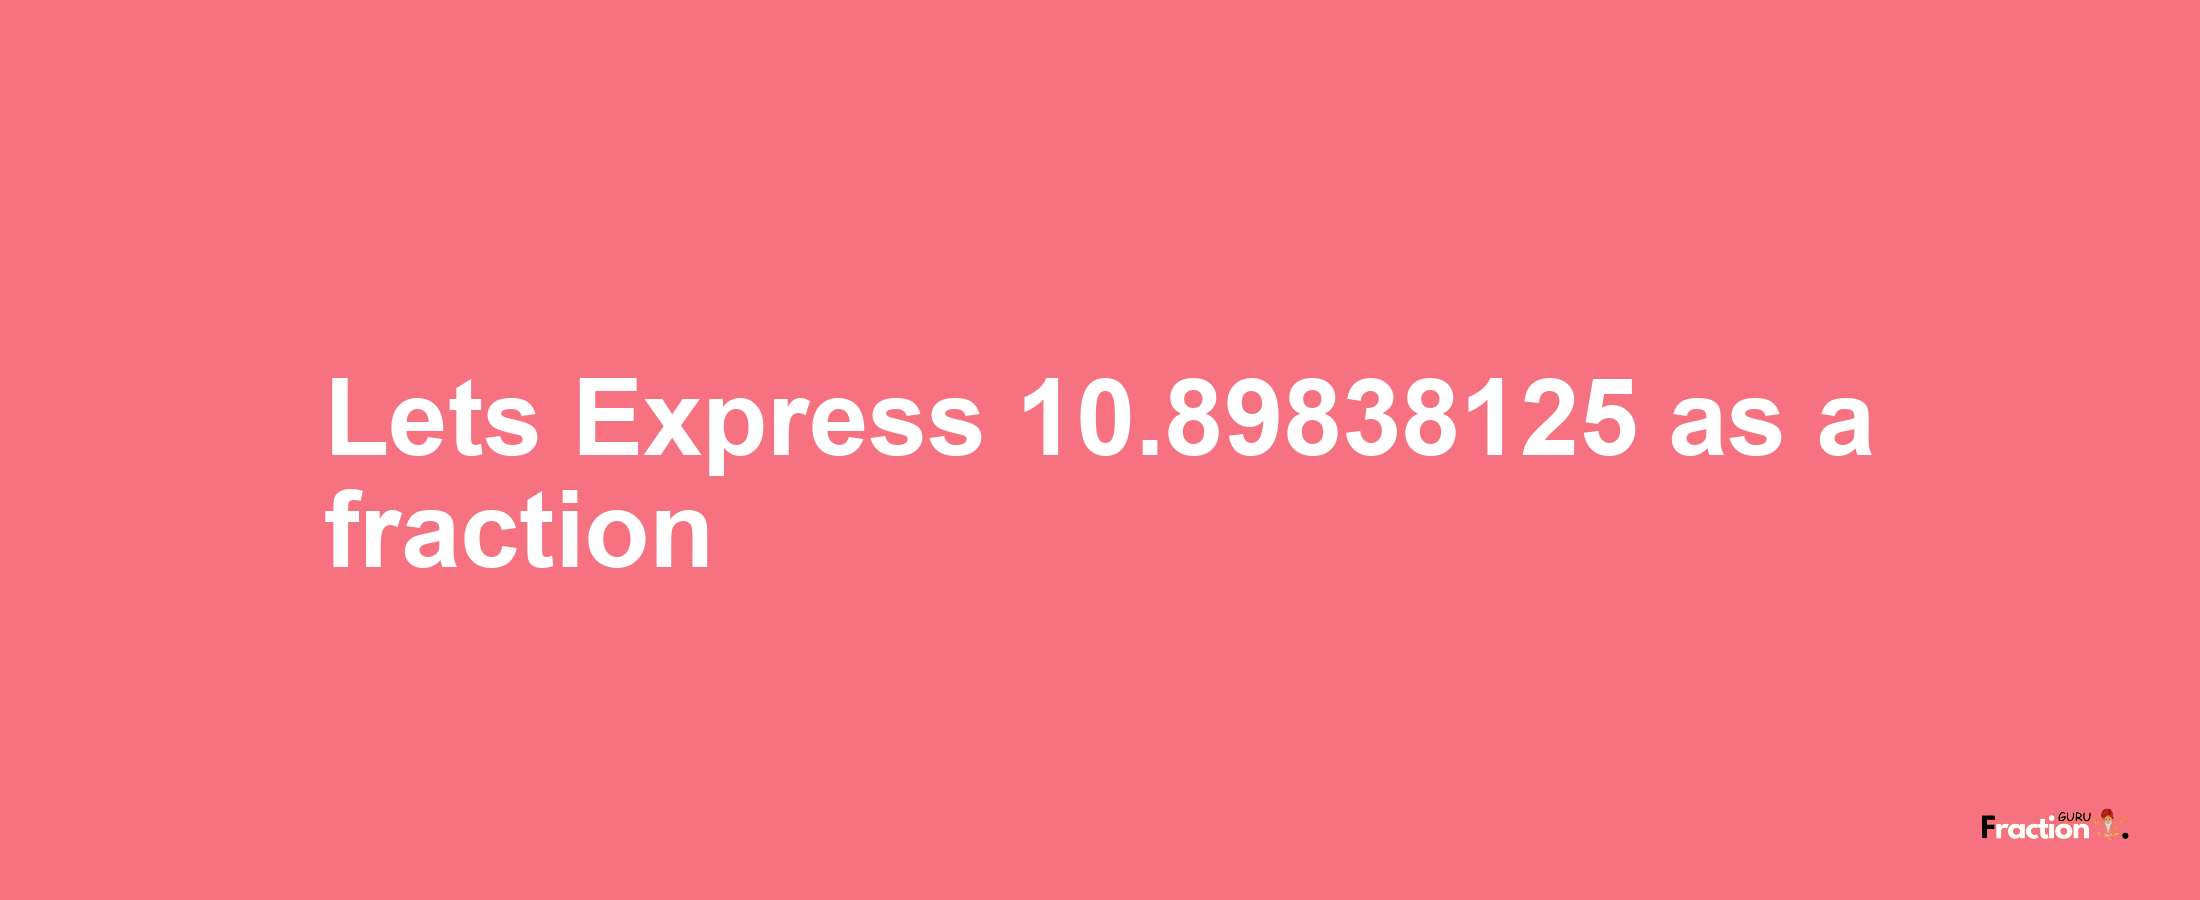 Lets Express 10.89838125 as afraction